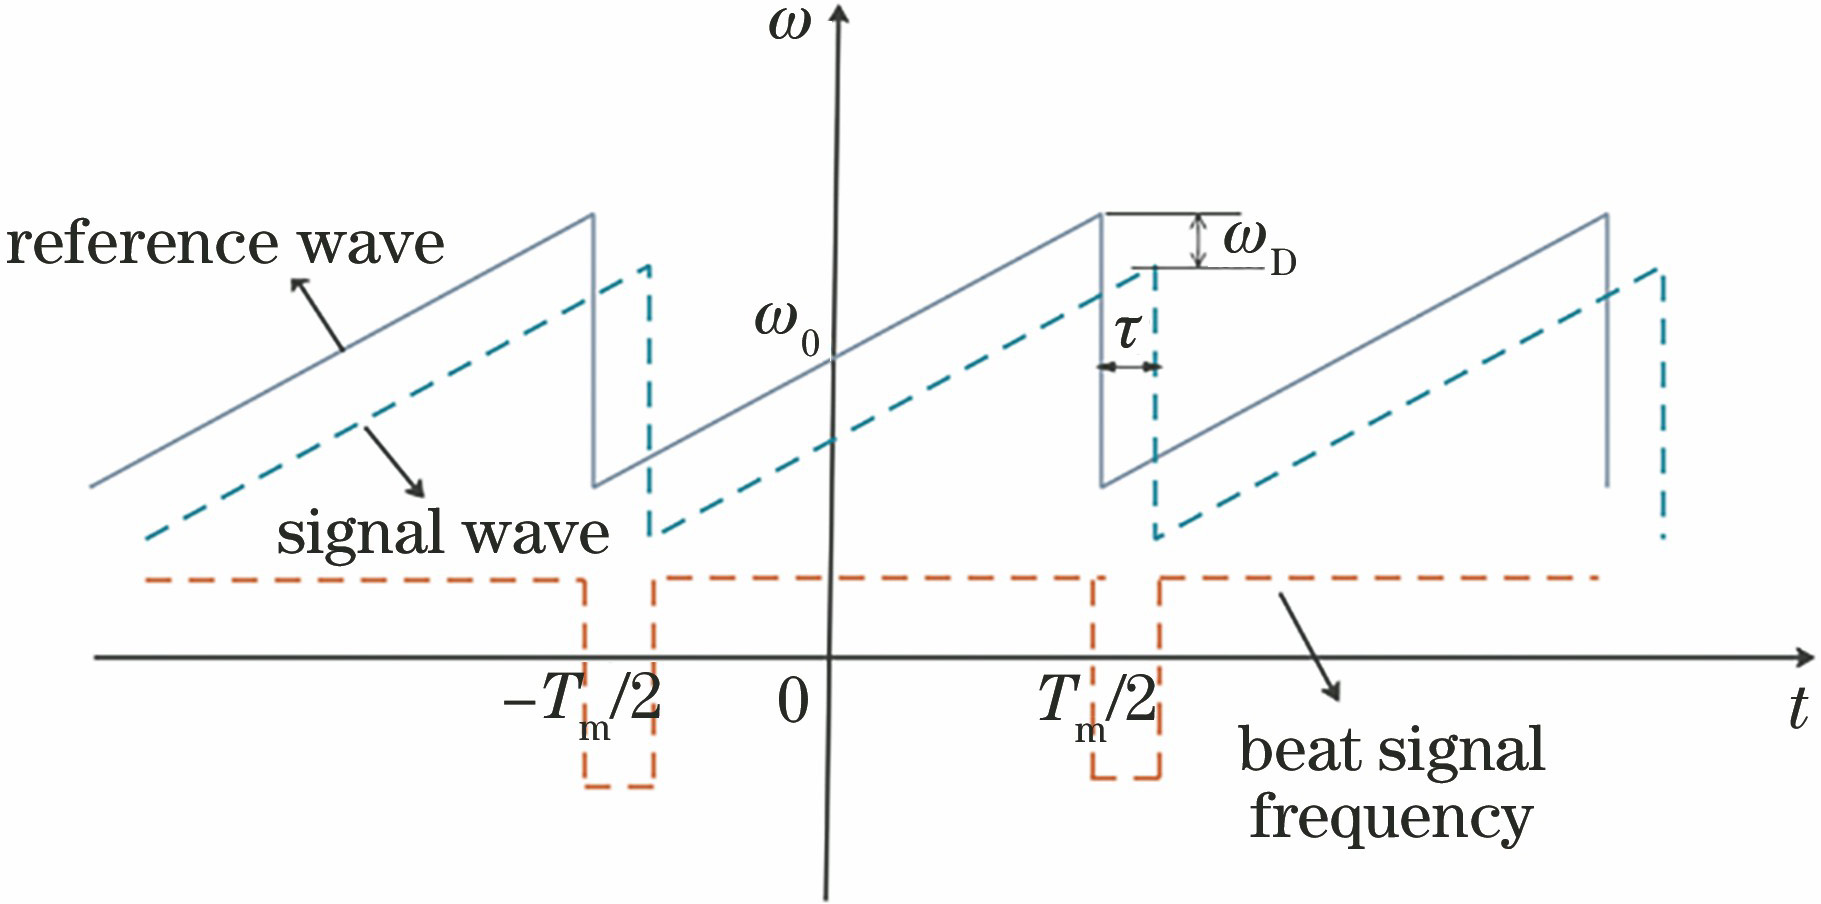 Variation of angular frequency of reference and signal waves with time